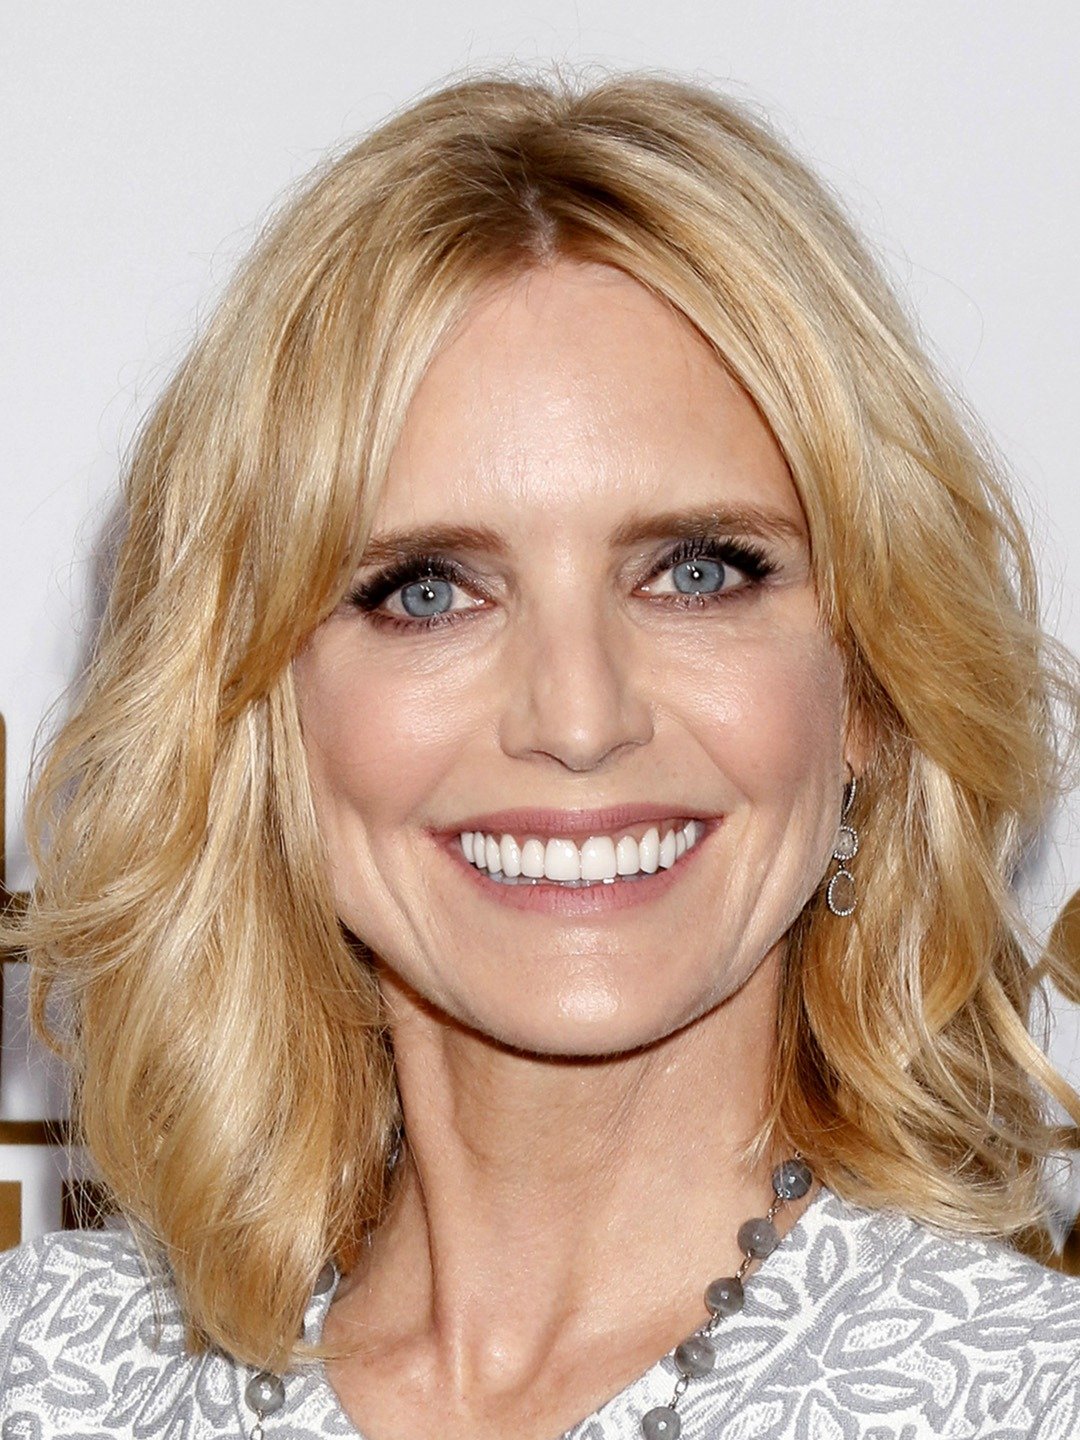 How tall is Courtney Thorne Smith?